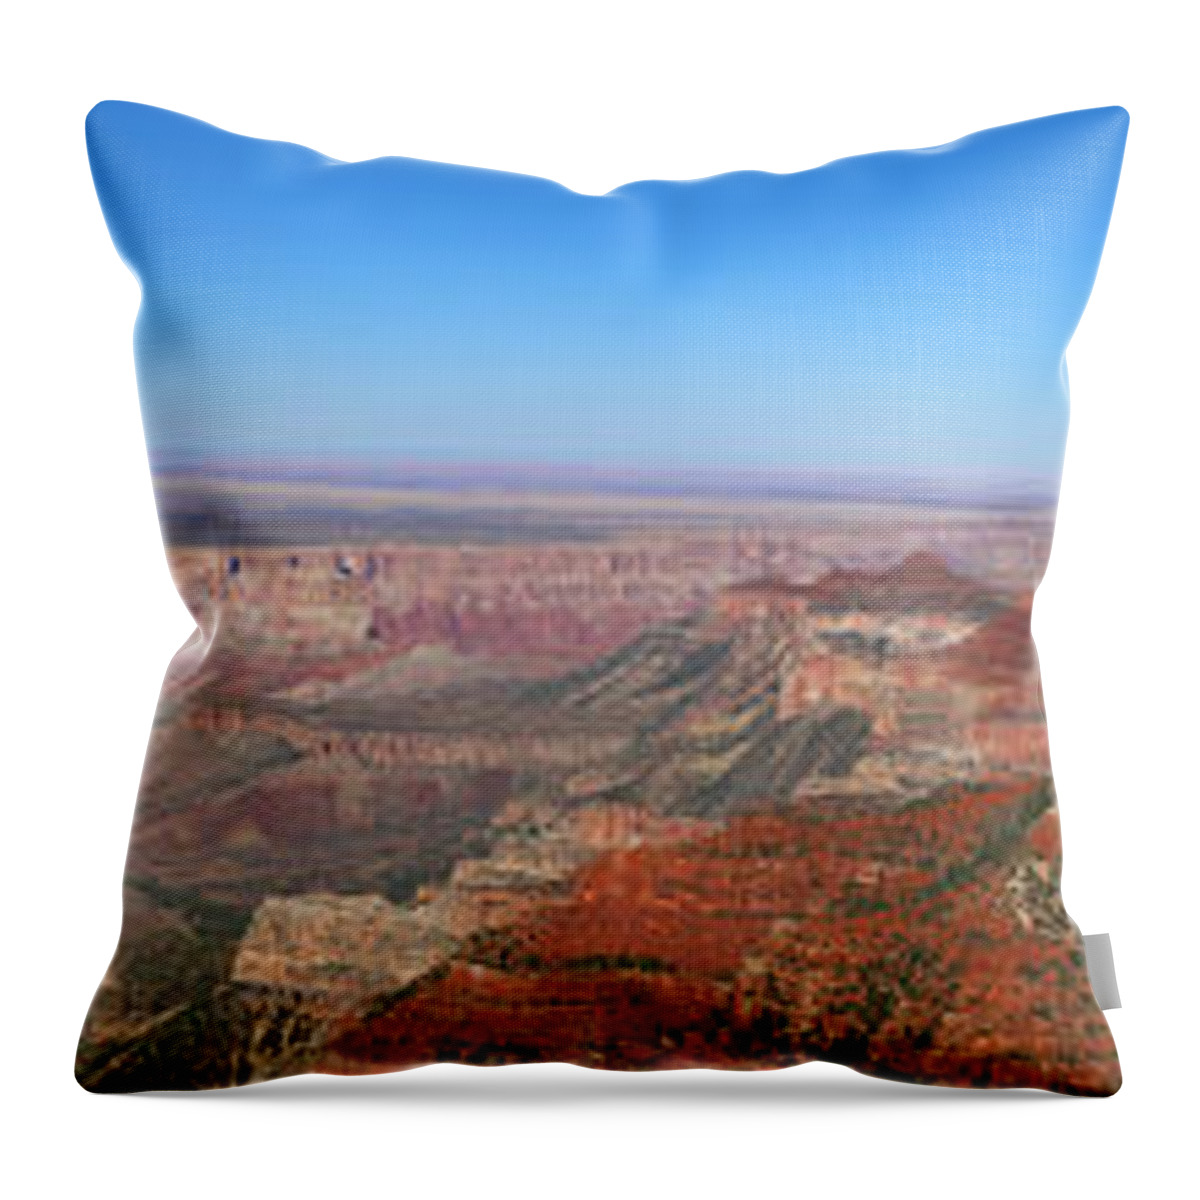 Cape Final Throw Pillow featuring the photograph A Gorgerous Grand Canyon View by Christiane Schulze Art And Photography